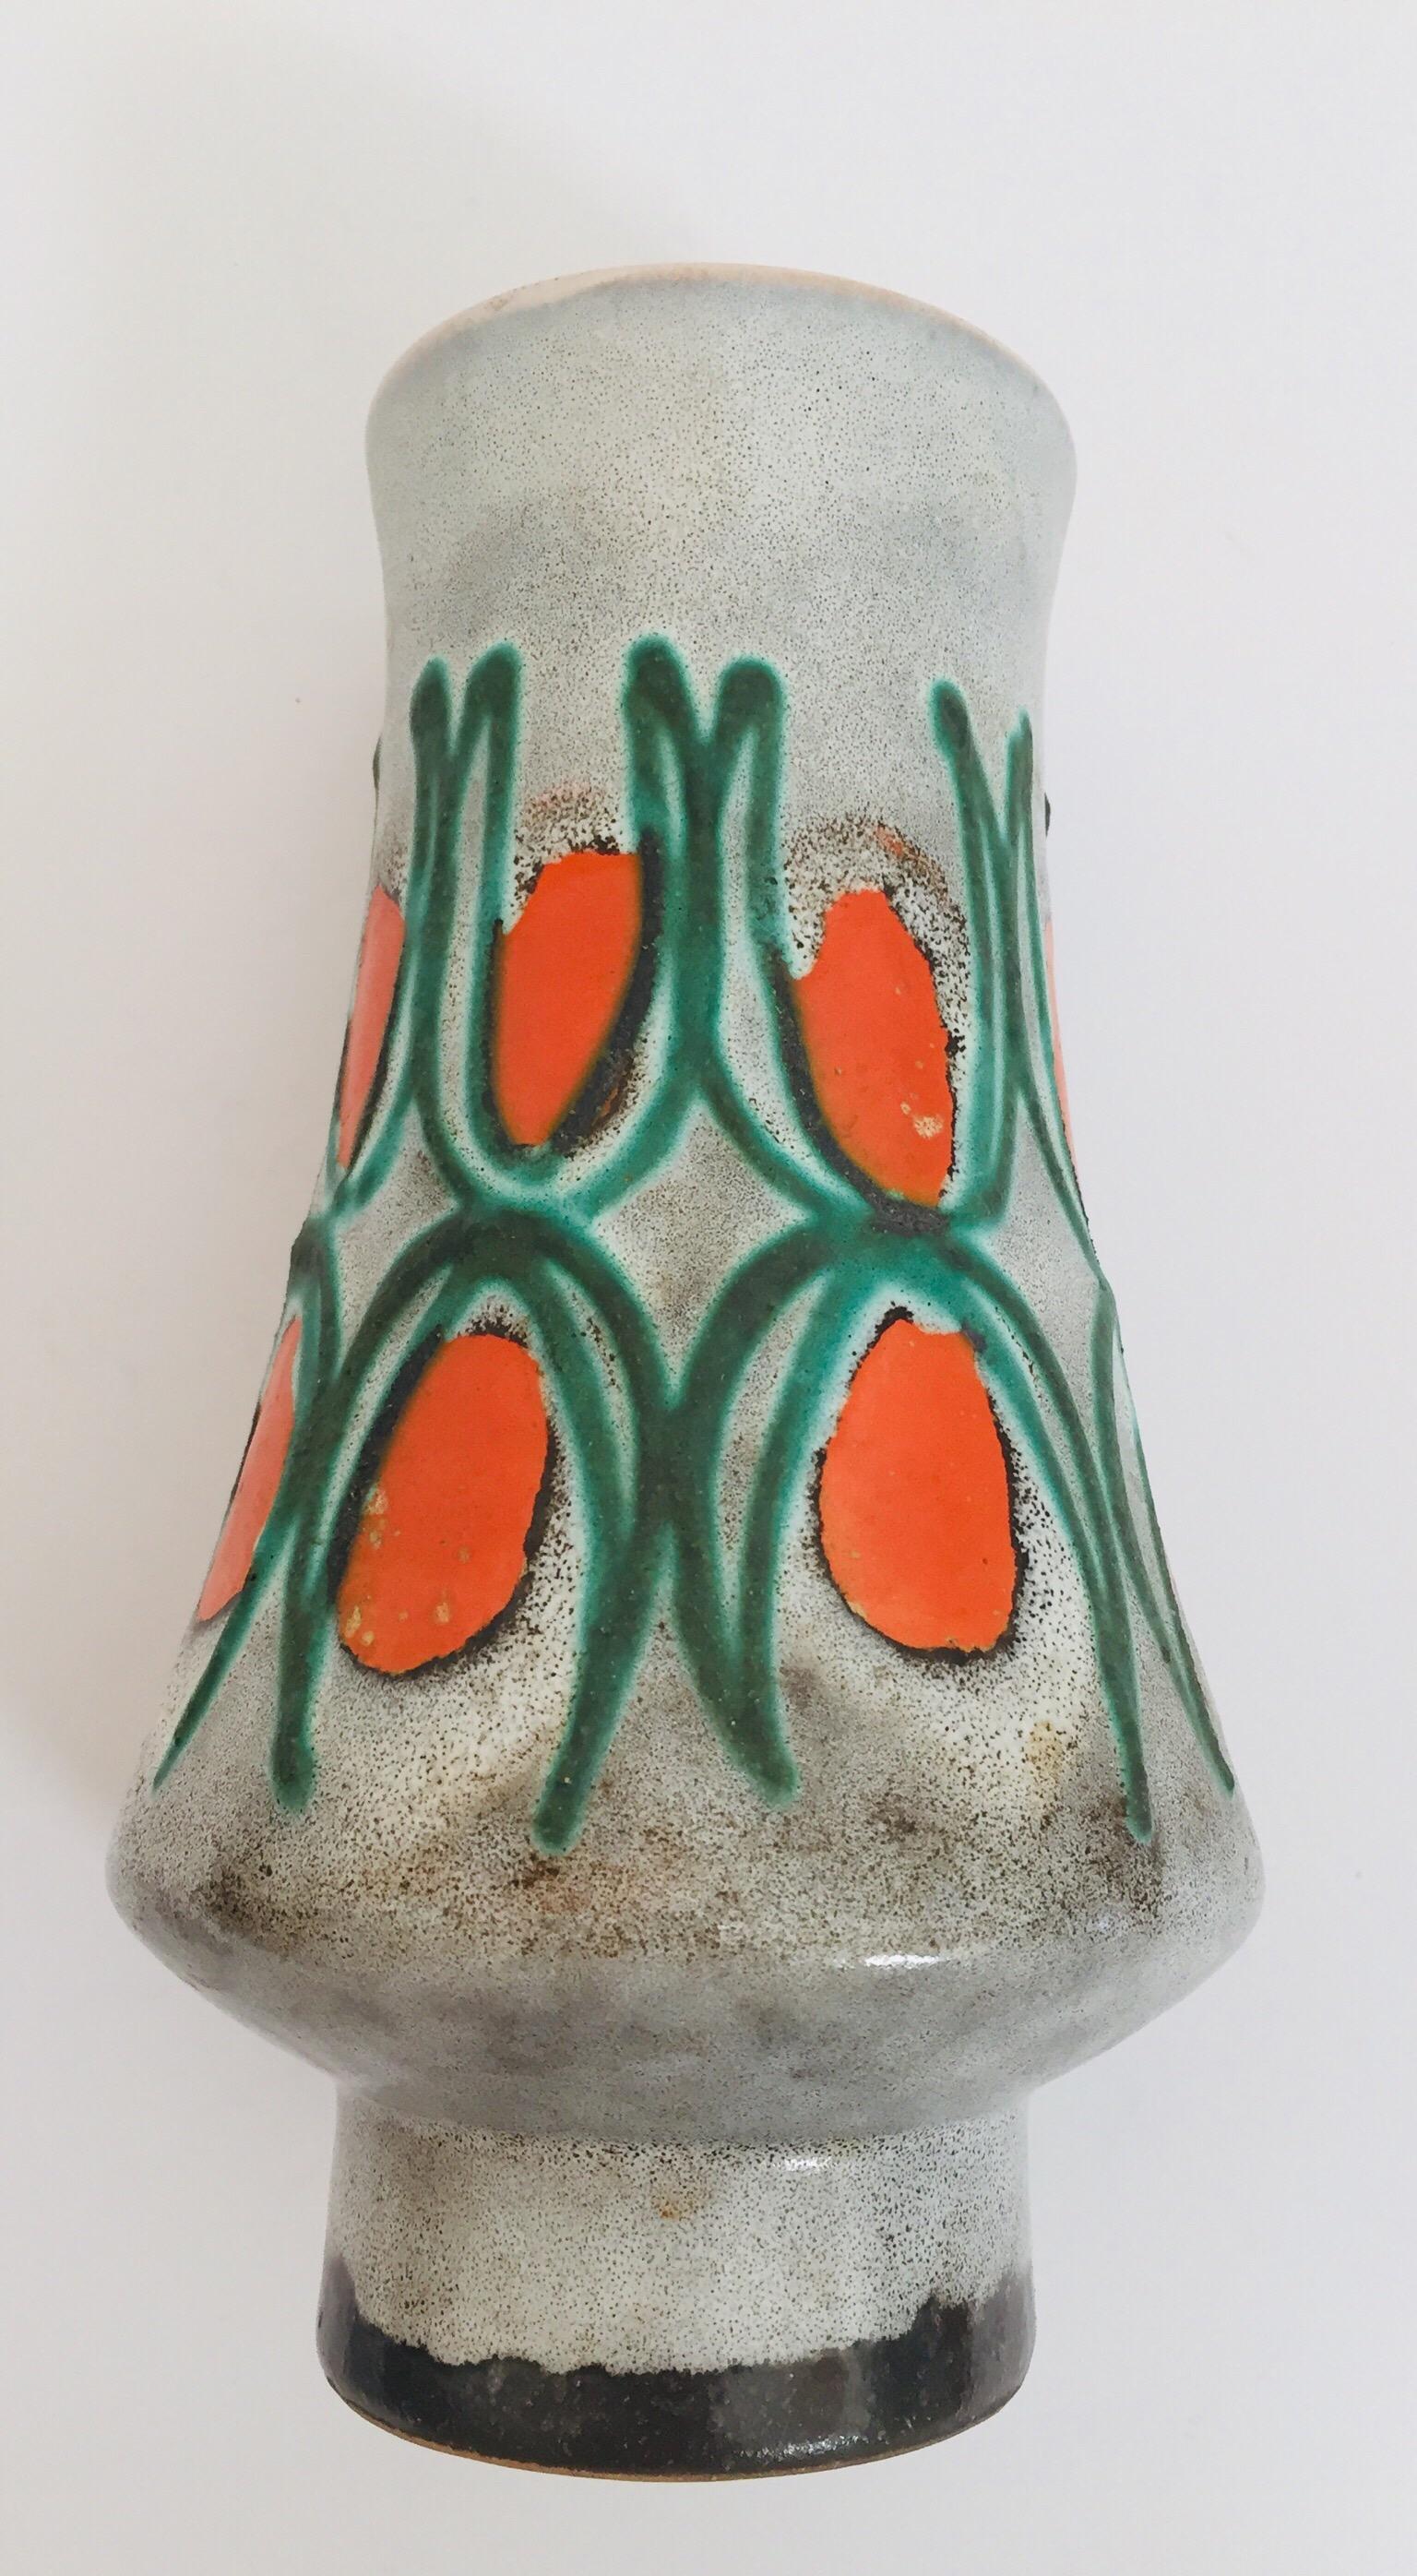 Ceramic 1950s Midcentury Glazed Vase with Red and Green, Strehla East Germany GDR